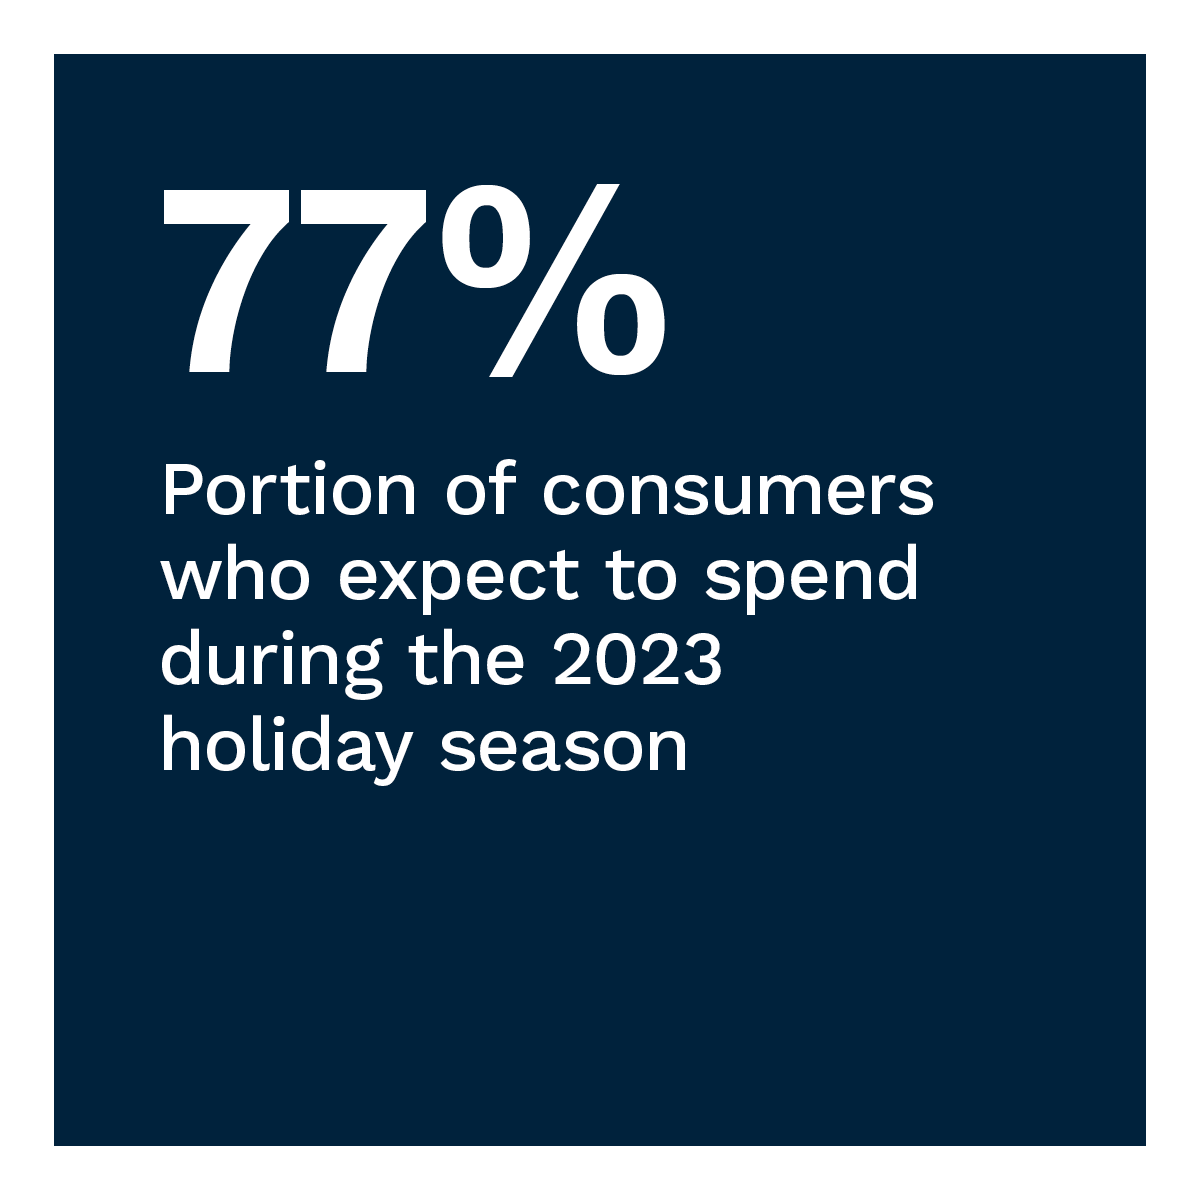 77%: Portion of consumers who expect to spend during the 2023 holiday season